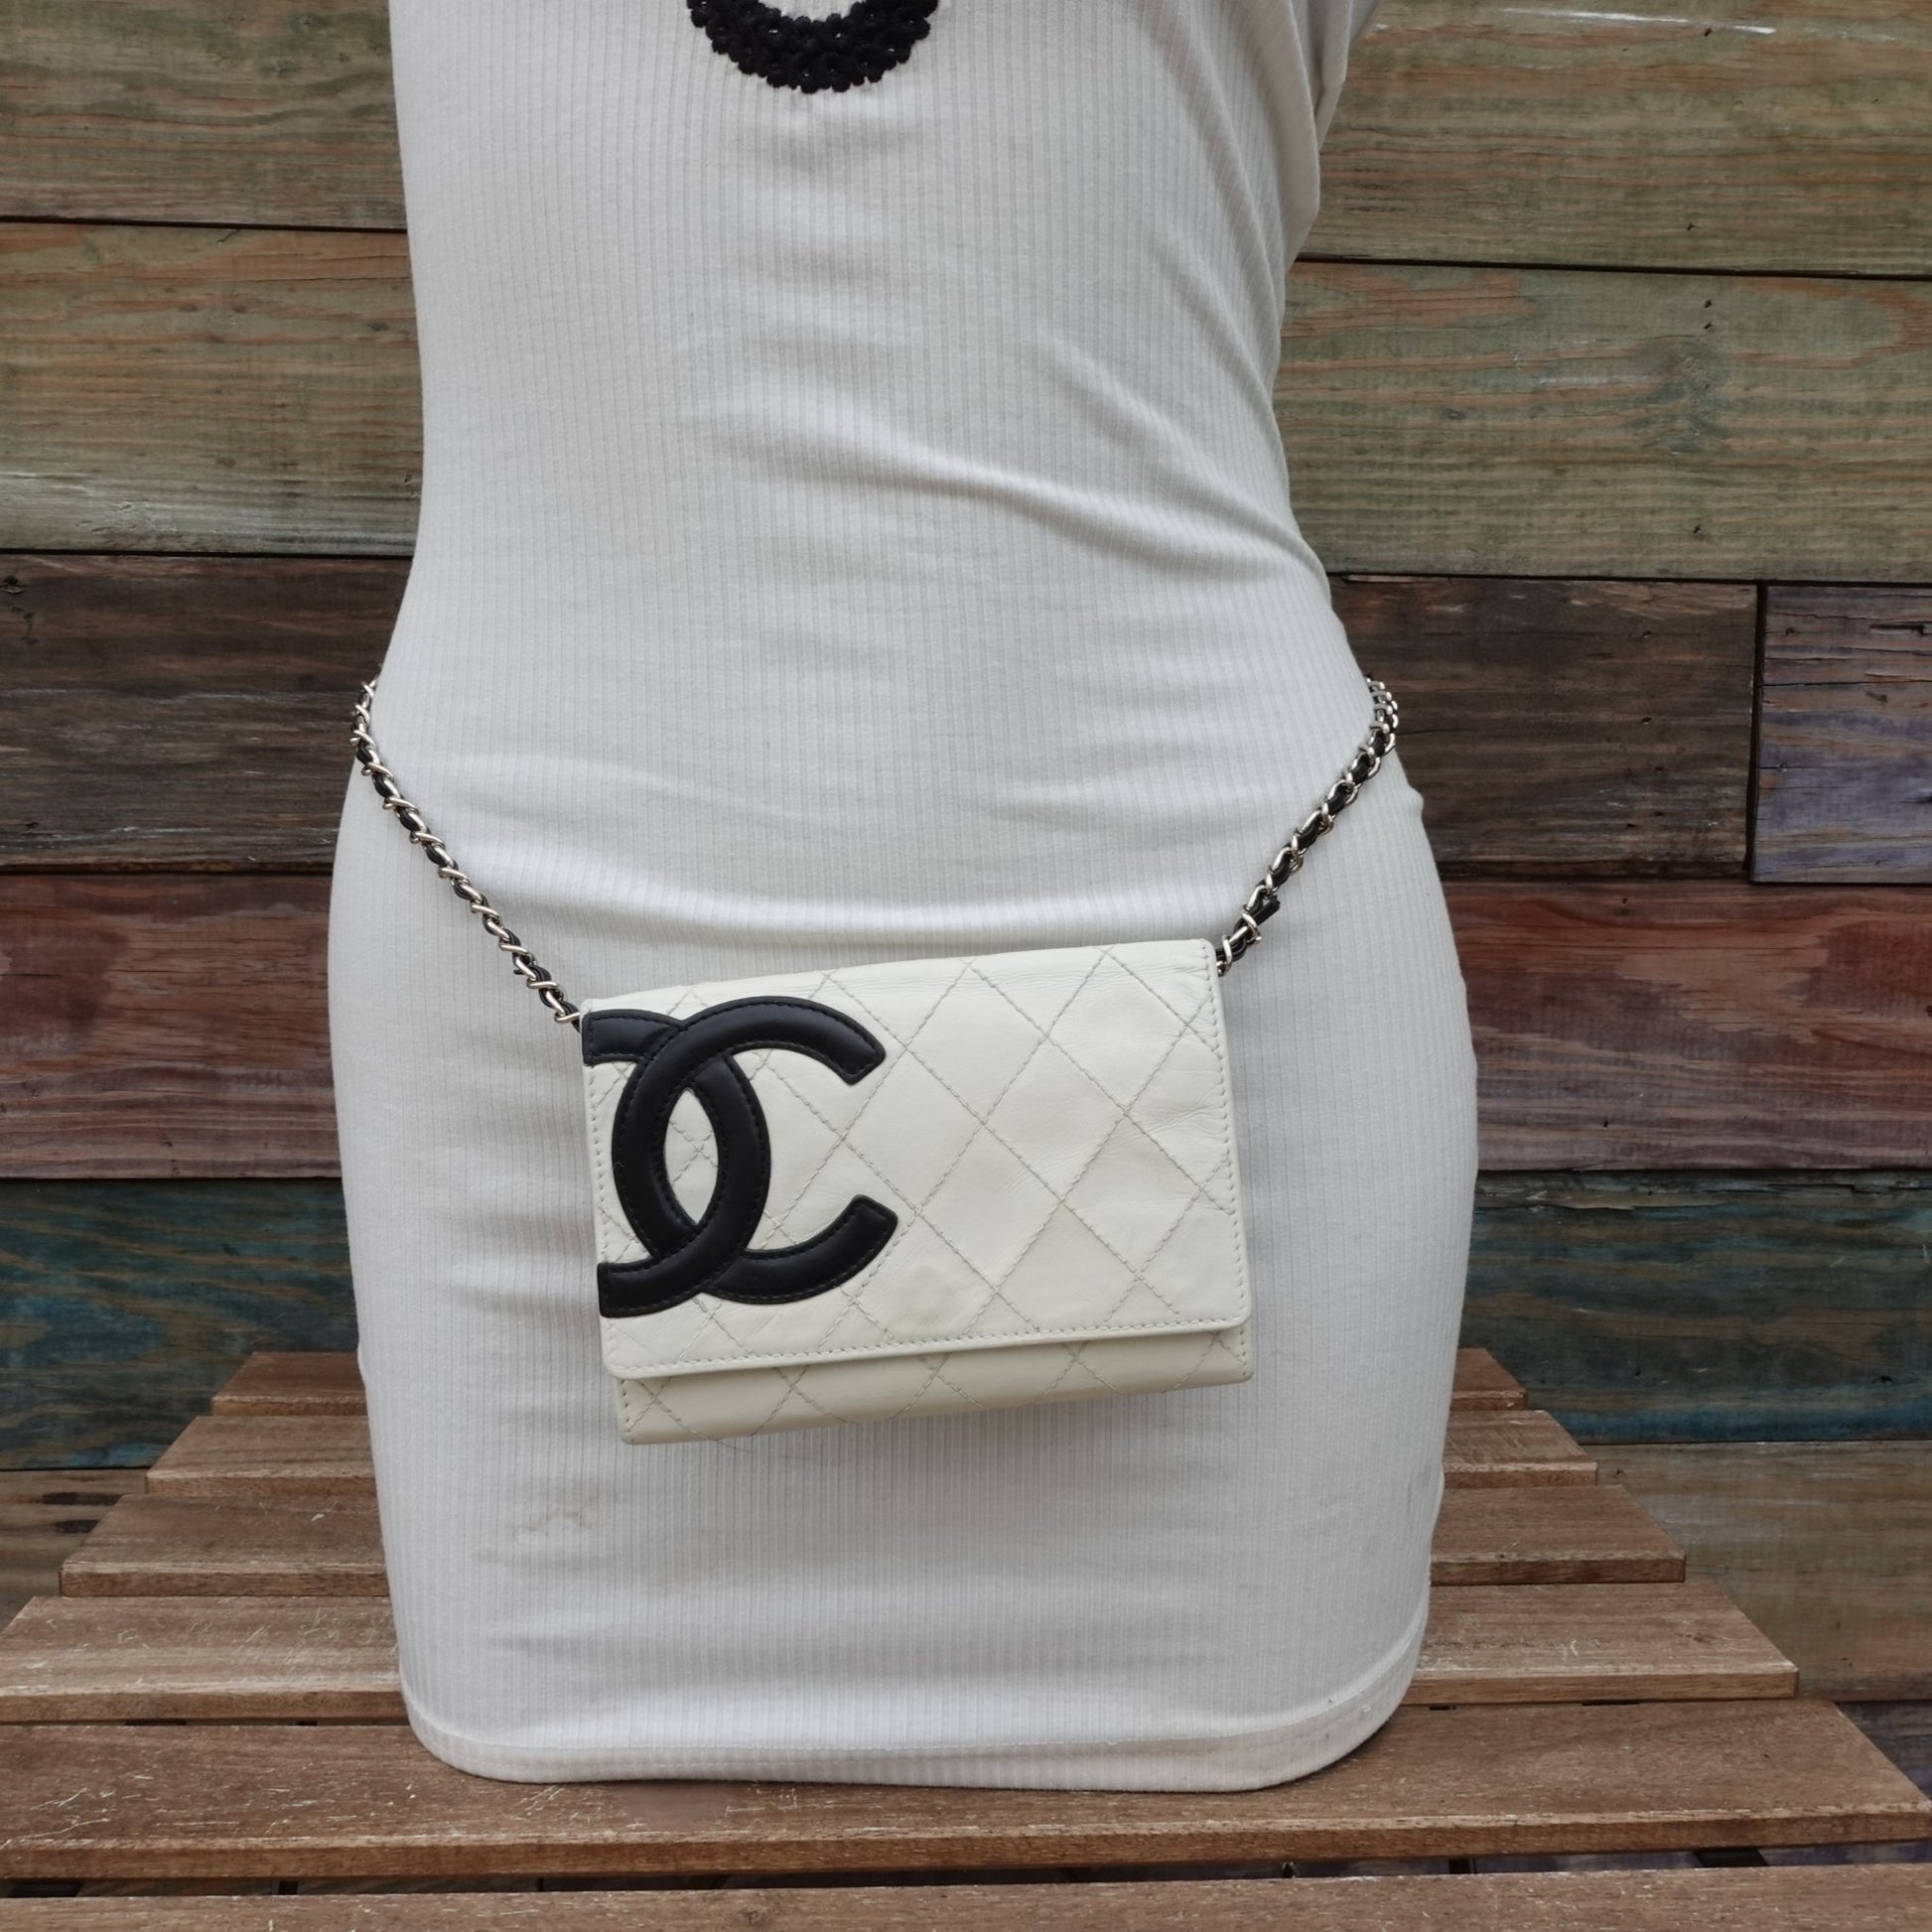 CHANEL Lambskin Cambon Compact Wallet On Adjustable Chain - Bag Envy